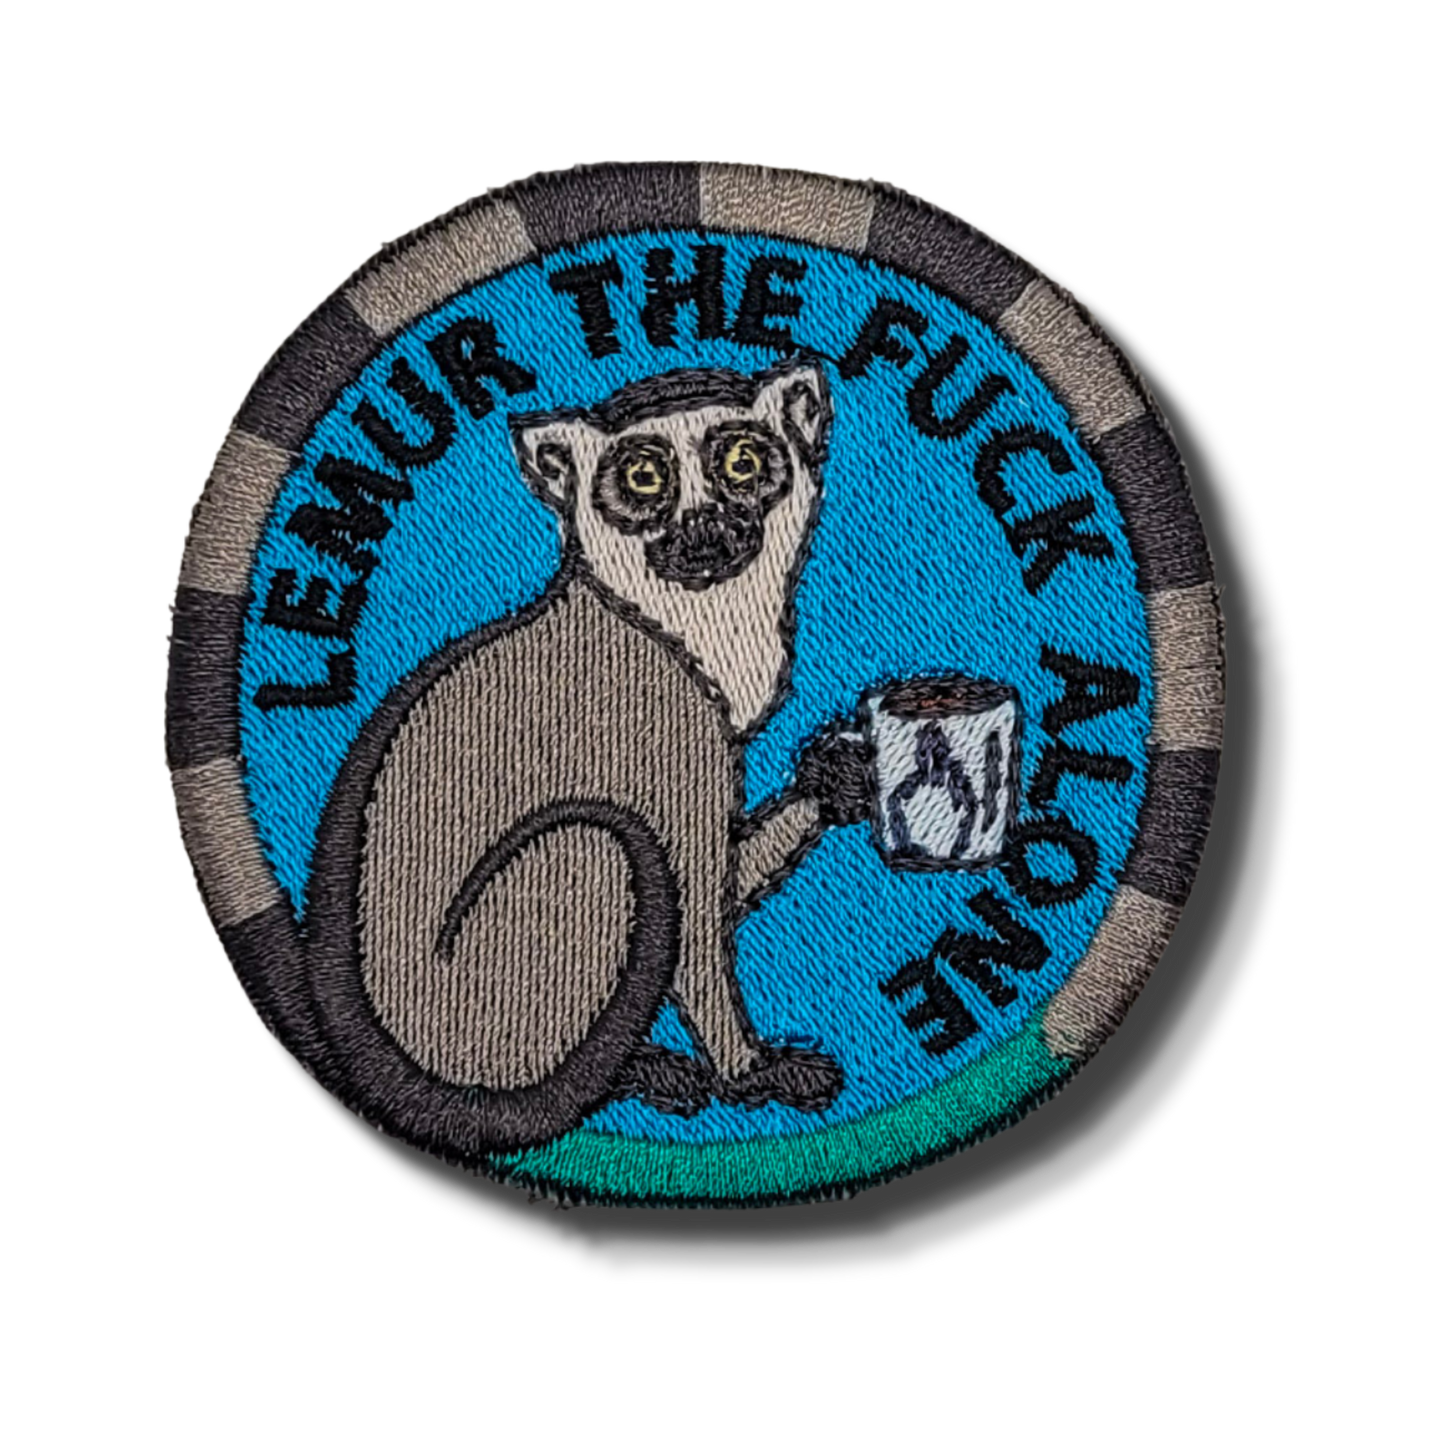 Lemur The Fuck Alone Embroidered Patch